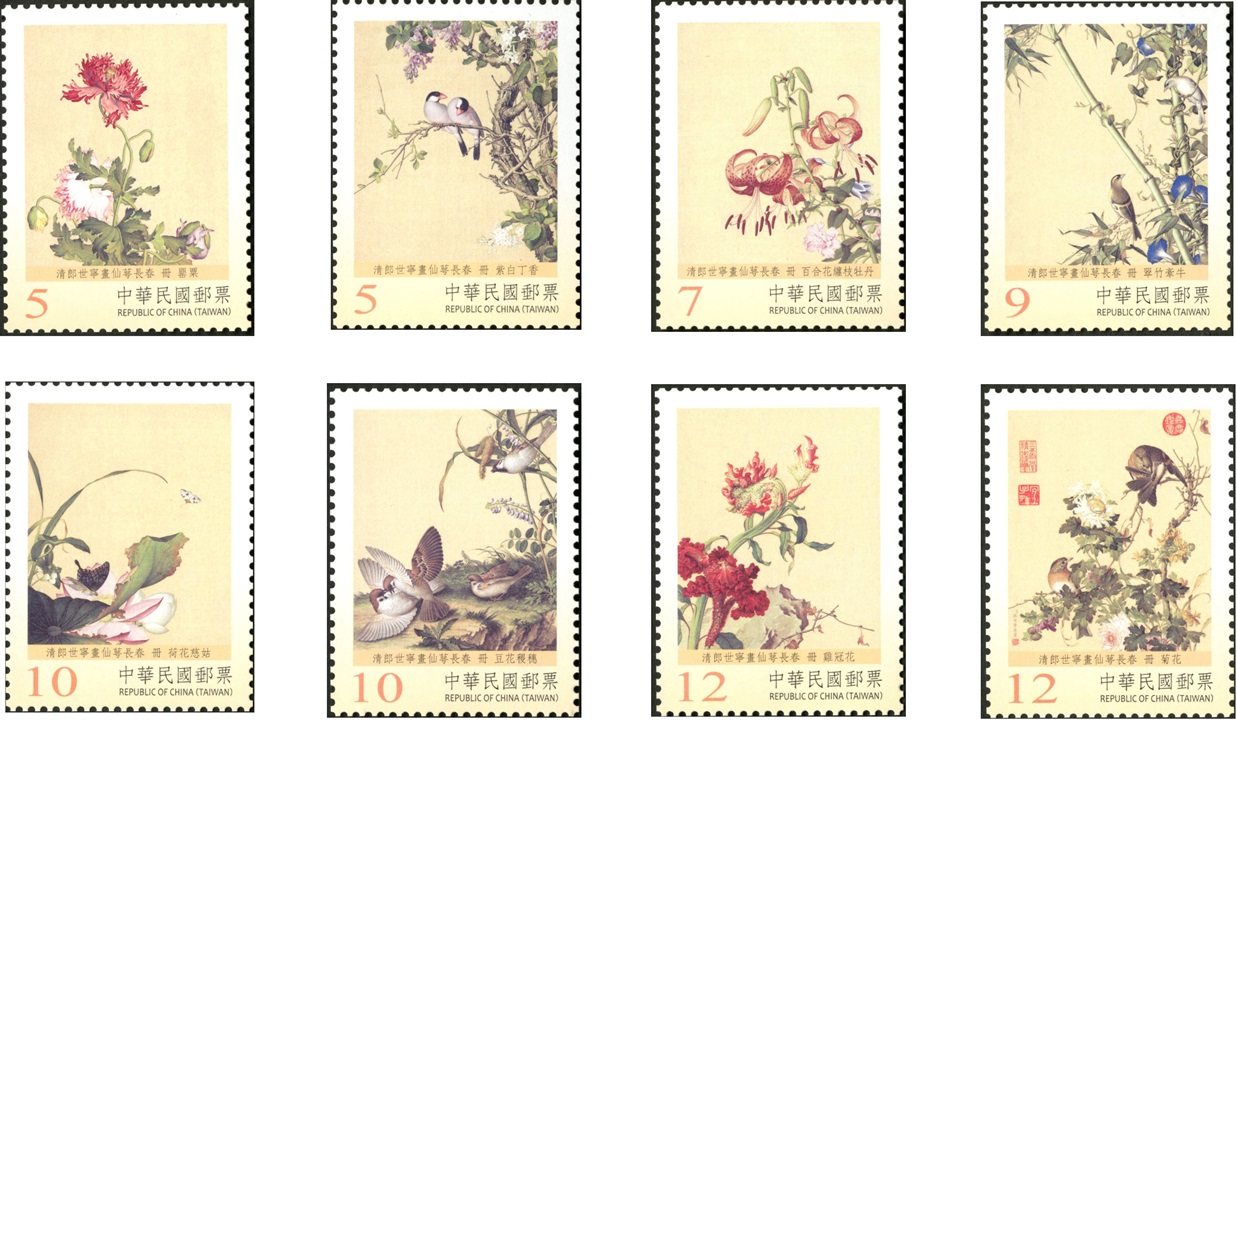 Ancient Chinese Paintings from the National Palace Museum Postage Stamps: Immortal Blossoms of an Eternal Spring (II)